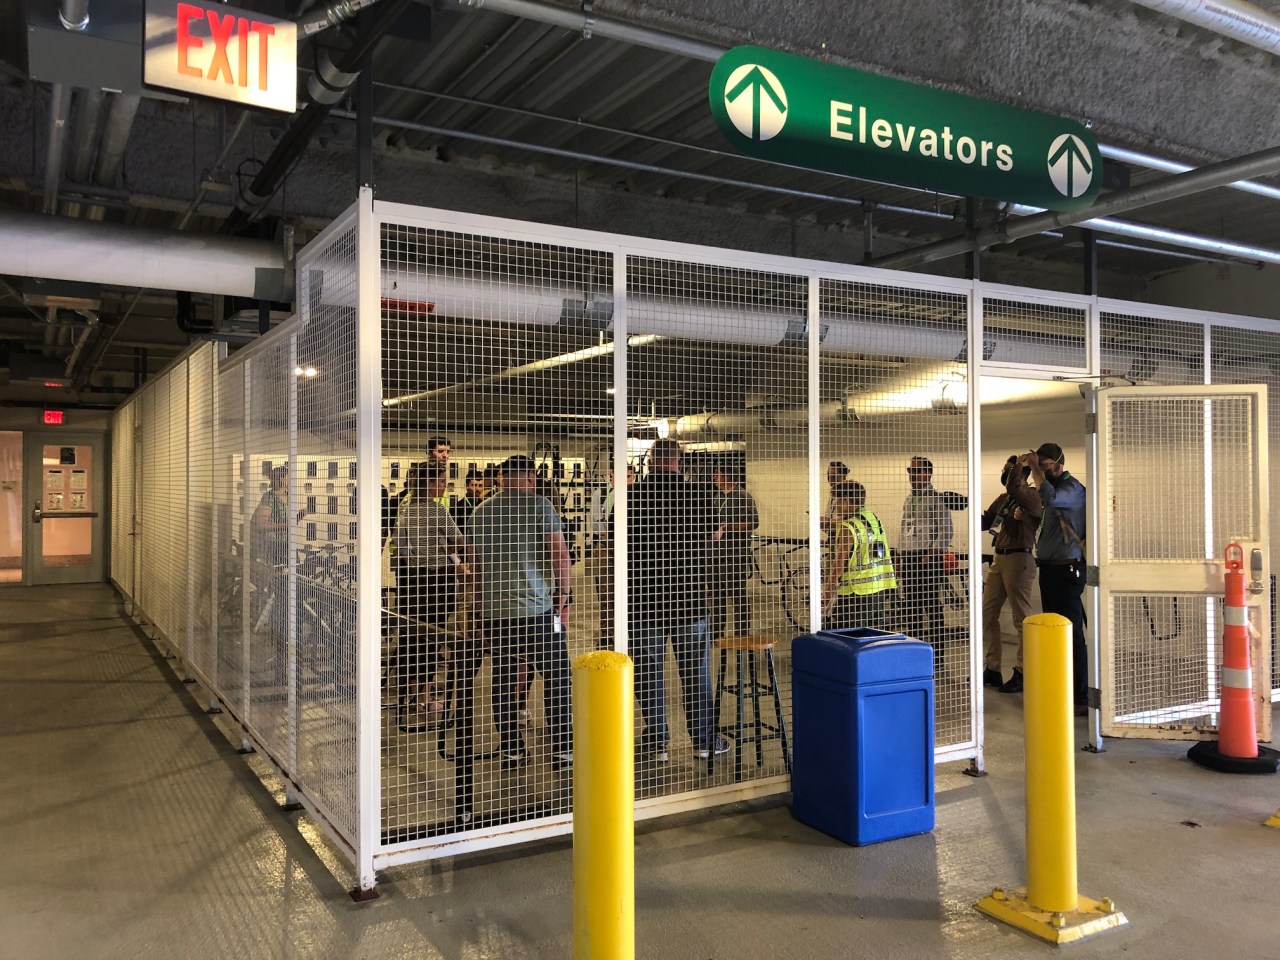 A small crowd chats inside a bike parking area surrounded by a white chain-link fence in a parking garage. "Exit" signs on the ceiling above point to a door in the distance next to the bike parking area, which leads to the office building's lobby. The back wall of the bike storage room is covered with lockers.